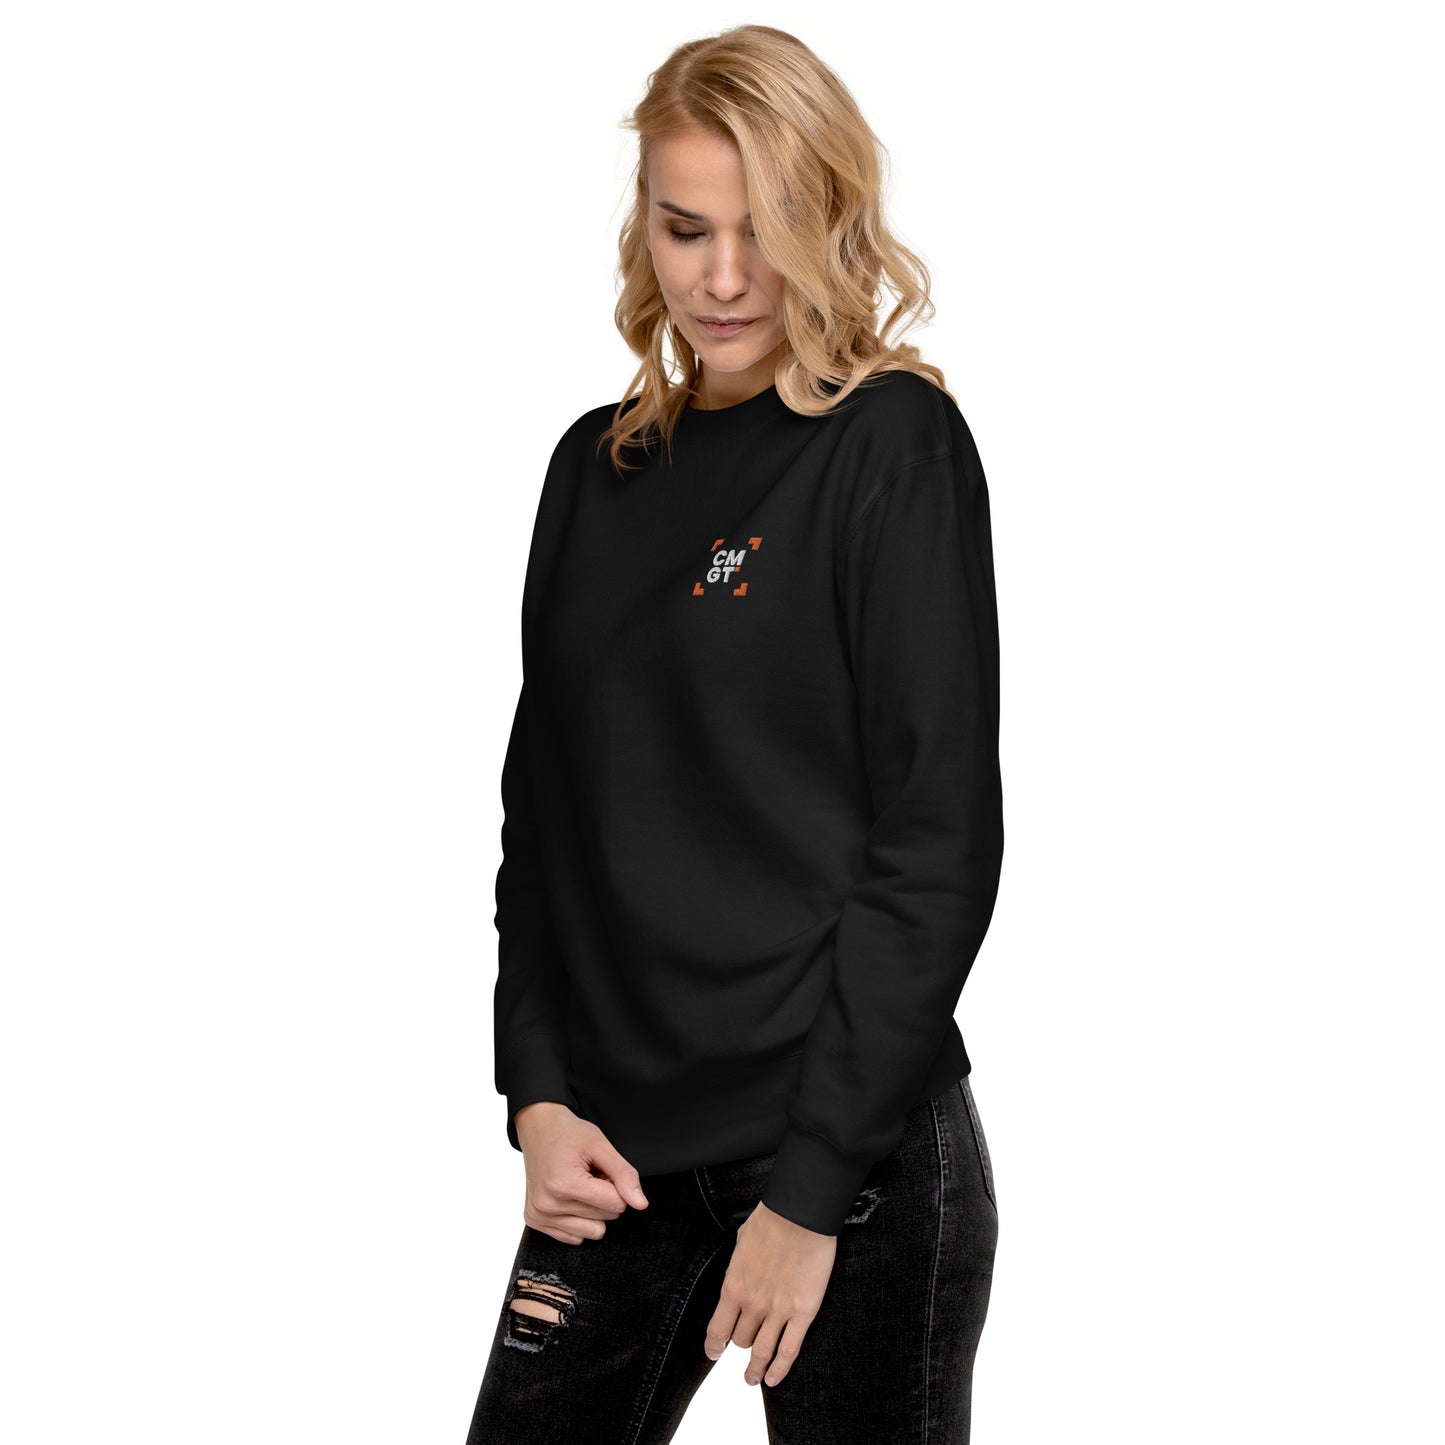 CMGT Standard Sweater (Black Embroidery)